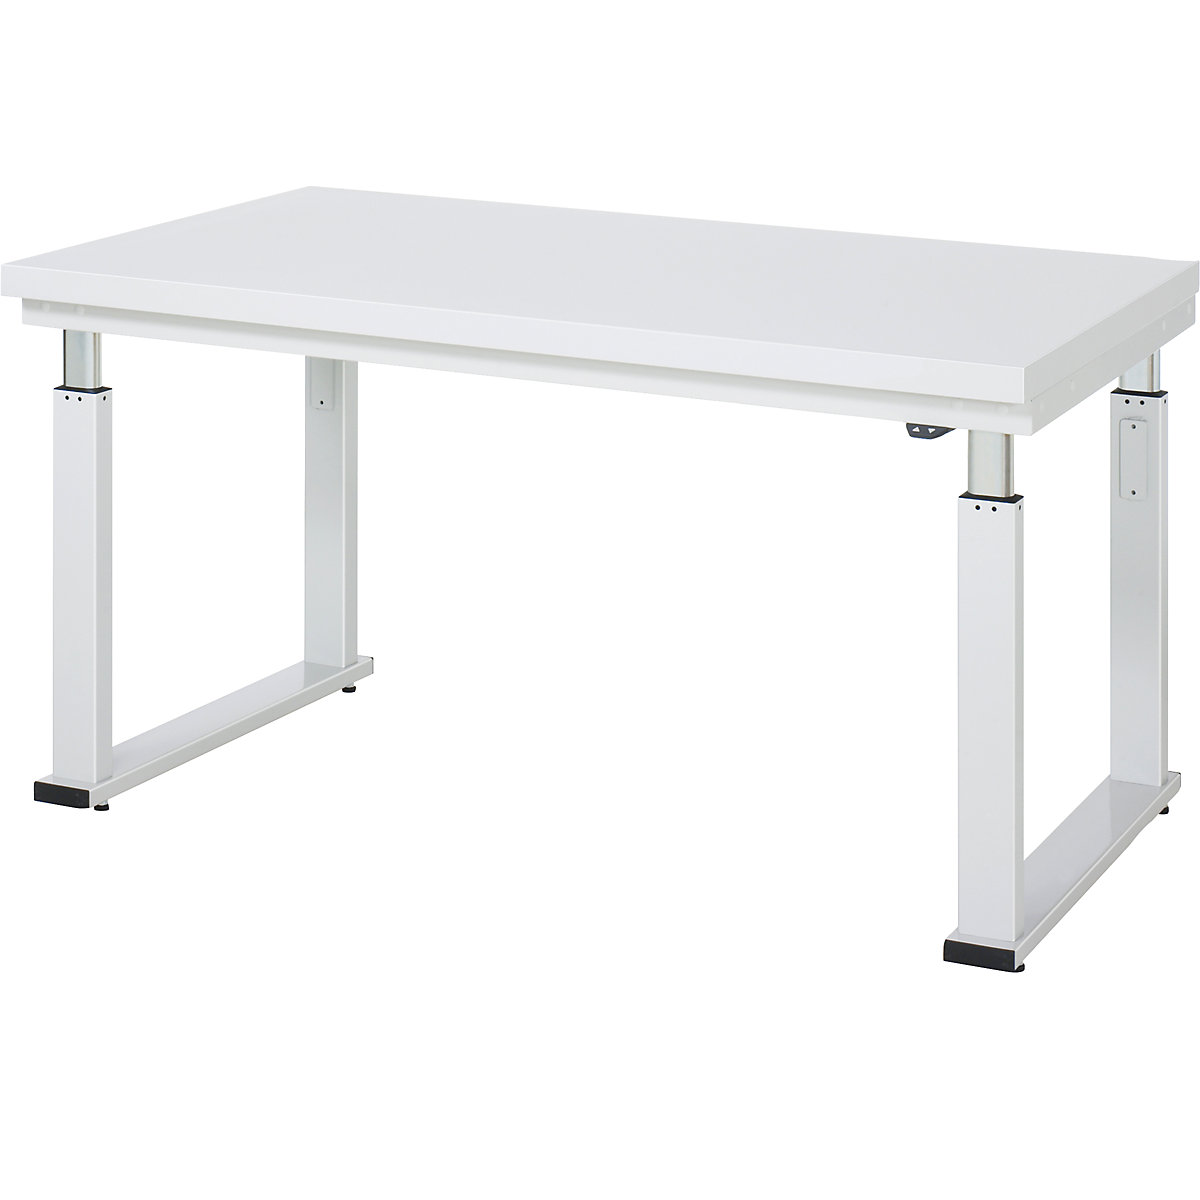 Work table, electric height adjustment – RAU, hardened laminate worktop, max. load 600 kg, WxD 1500 x 900 mm-18